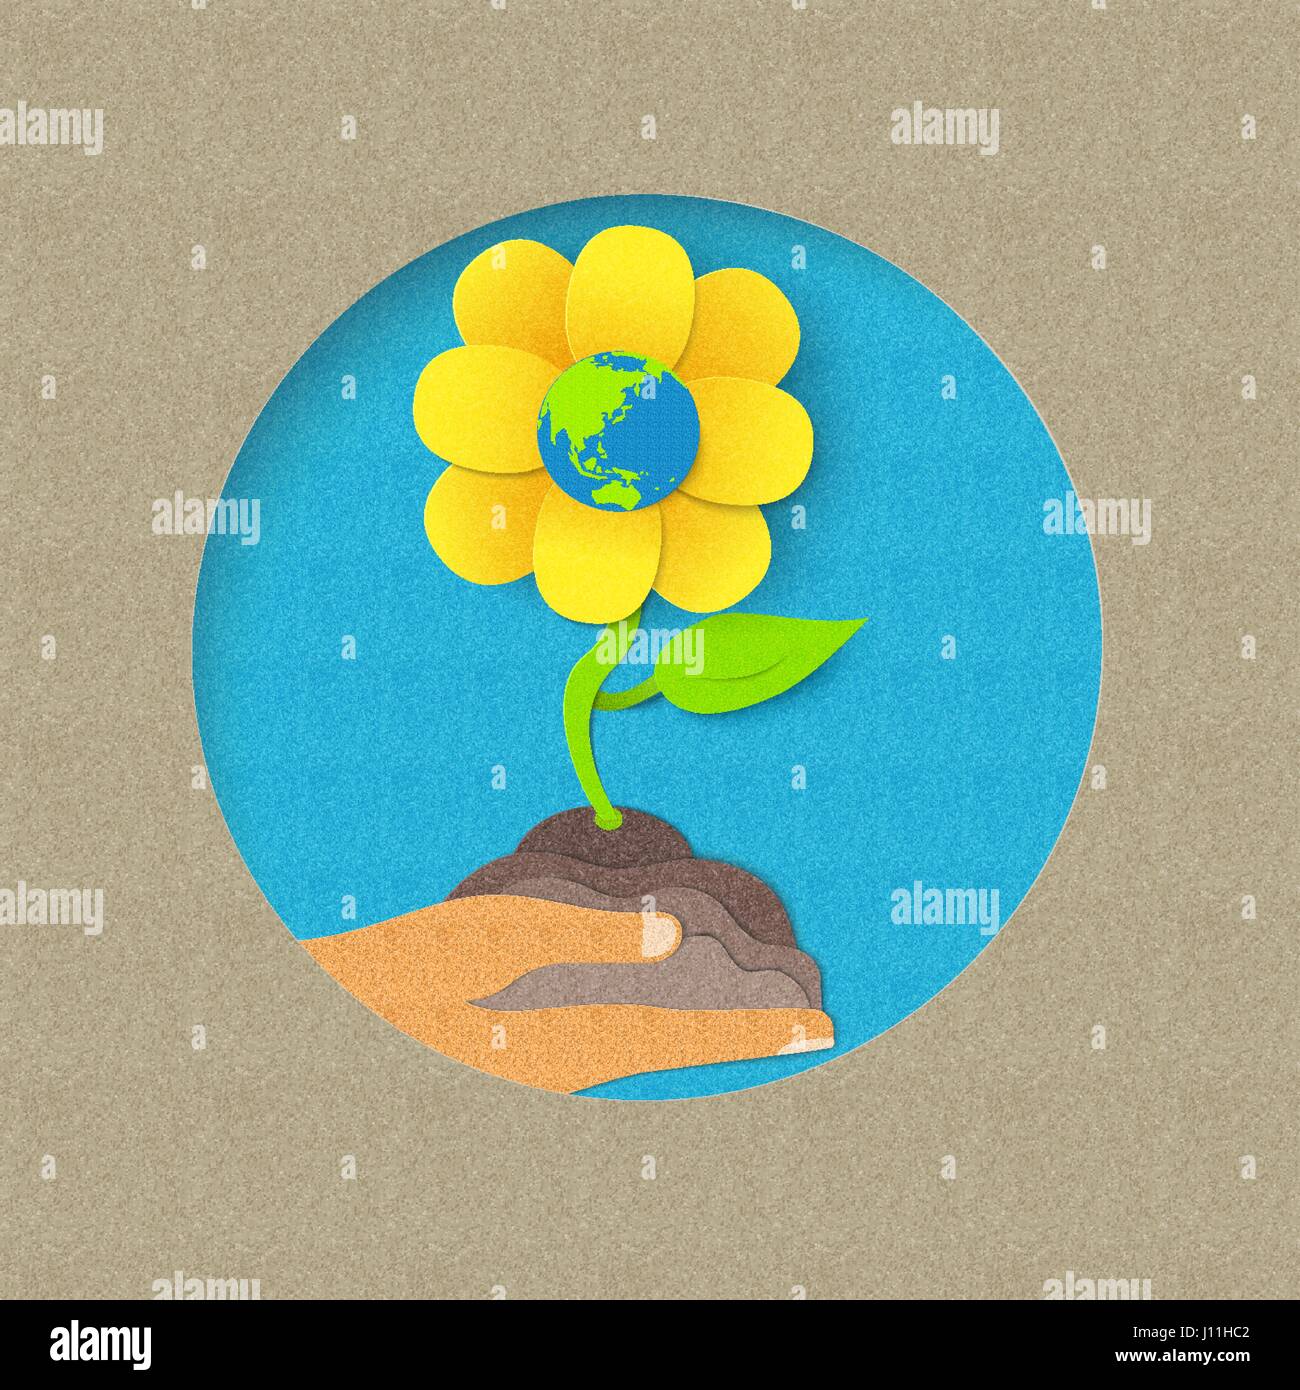 Earth day illustration for world environment care. Paper cut style flower growing from human hand. EPS10 vector. Stock Vector